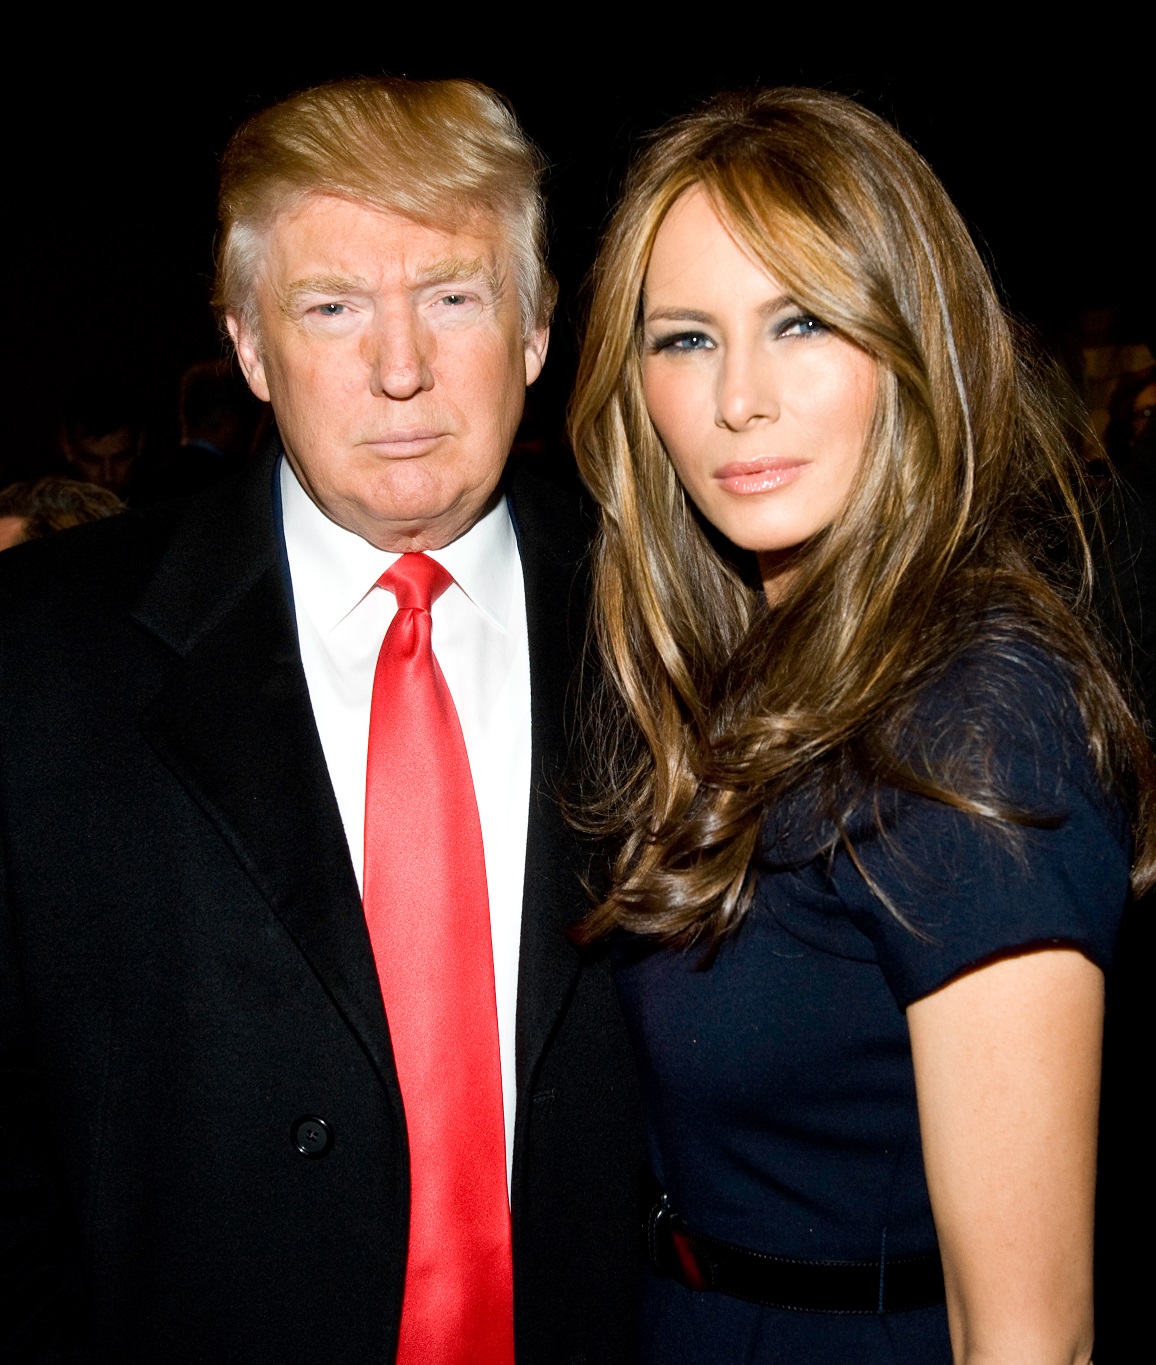 NEW YORK - FEBRUARY 17: Donald Trump and Melania Trump attend the Michael Kors Fall 2010 show during Mercedes-Benz Fashion Week at Bryant Park on February 17, 2010 in New York City. (Photo by Shawn Ehlers/WireImage)